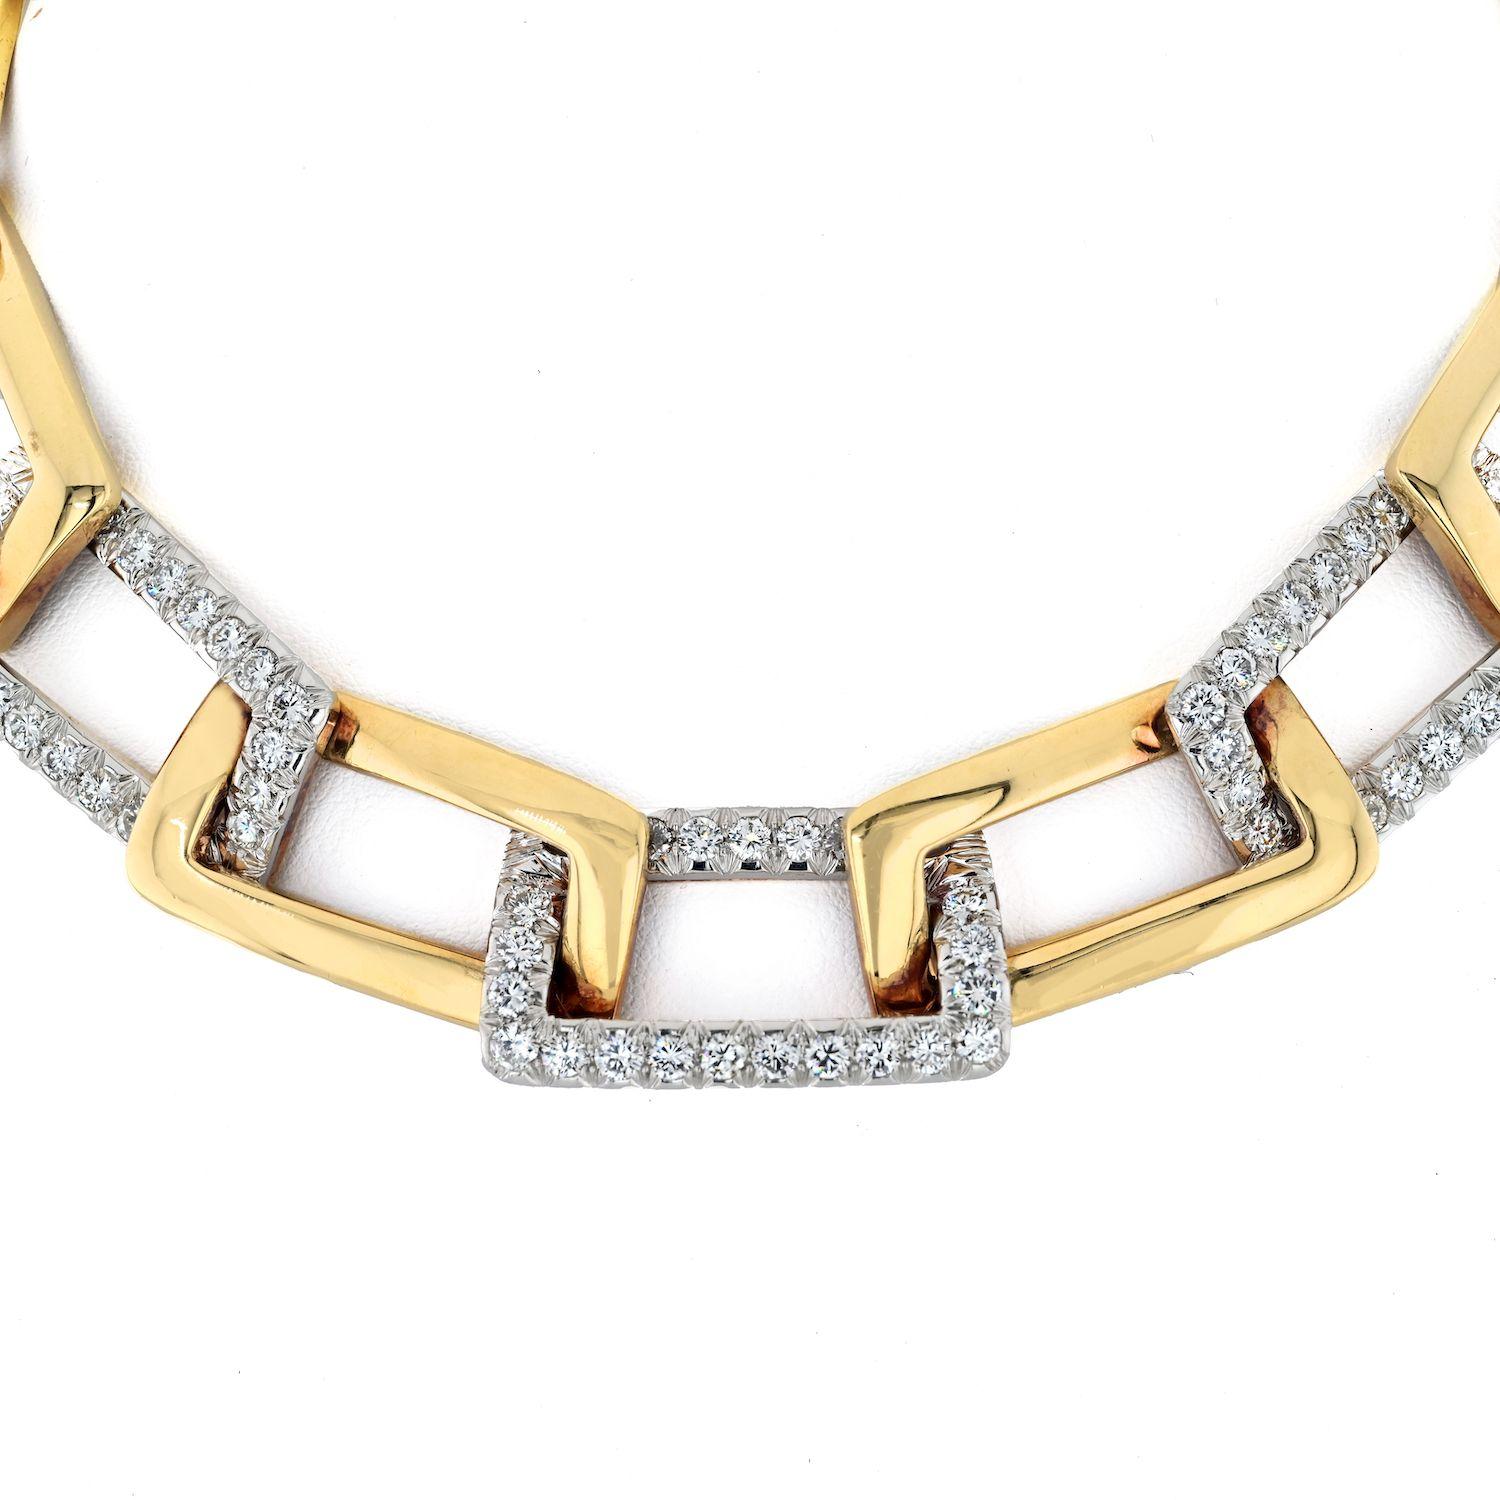 Introducing a masterpiece of timeless elegance and sophistication, the Estate 18k Yellow Gold and Diamond Open Link Necklace by David Webb. This exquisite necklace graces the collar bone with a luxurious touch, showcasing Webb's impeccable